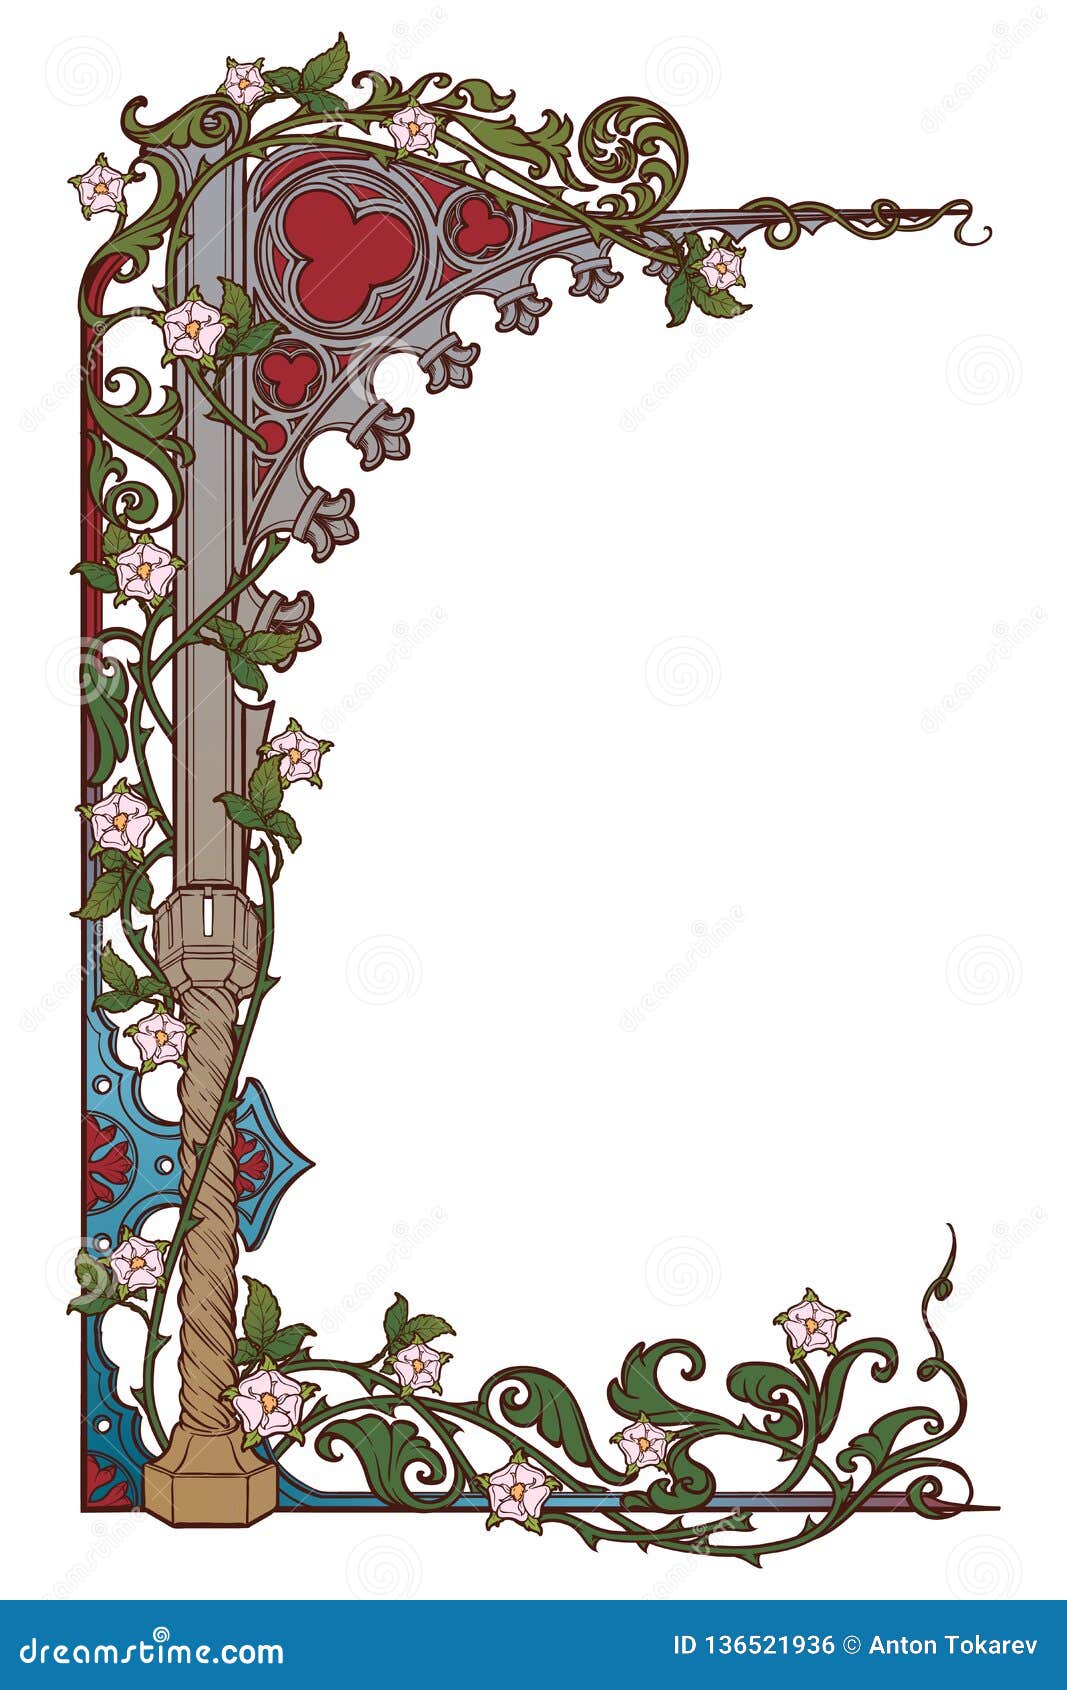 medieval manuscript style rectangular frame. gothic style pointed arch braided with a rose garlands. vertical